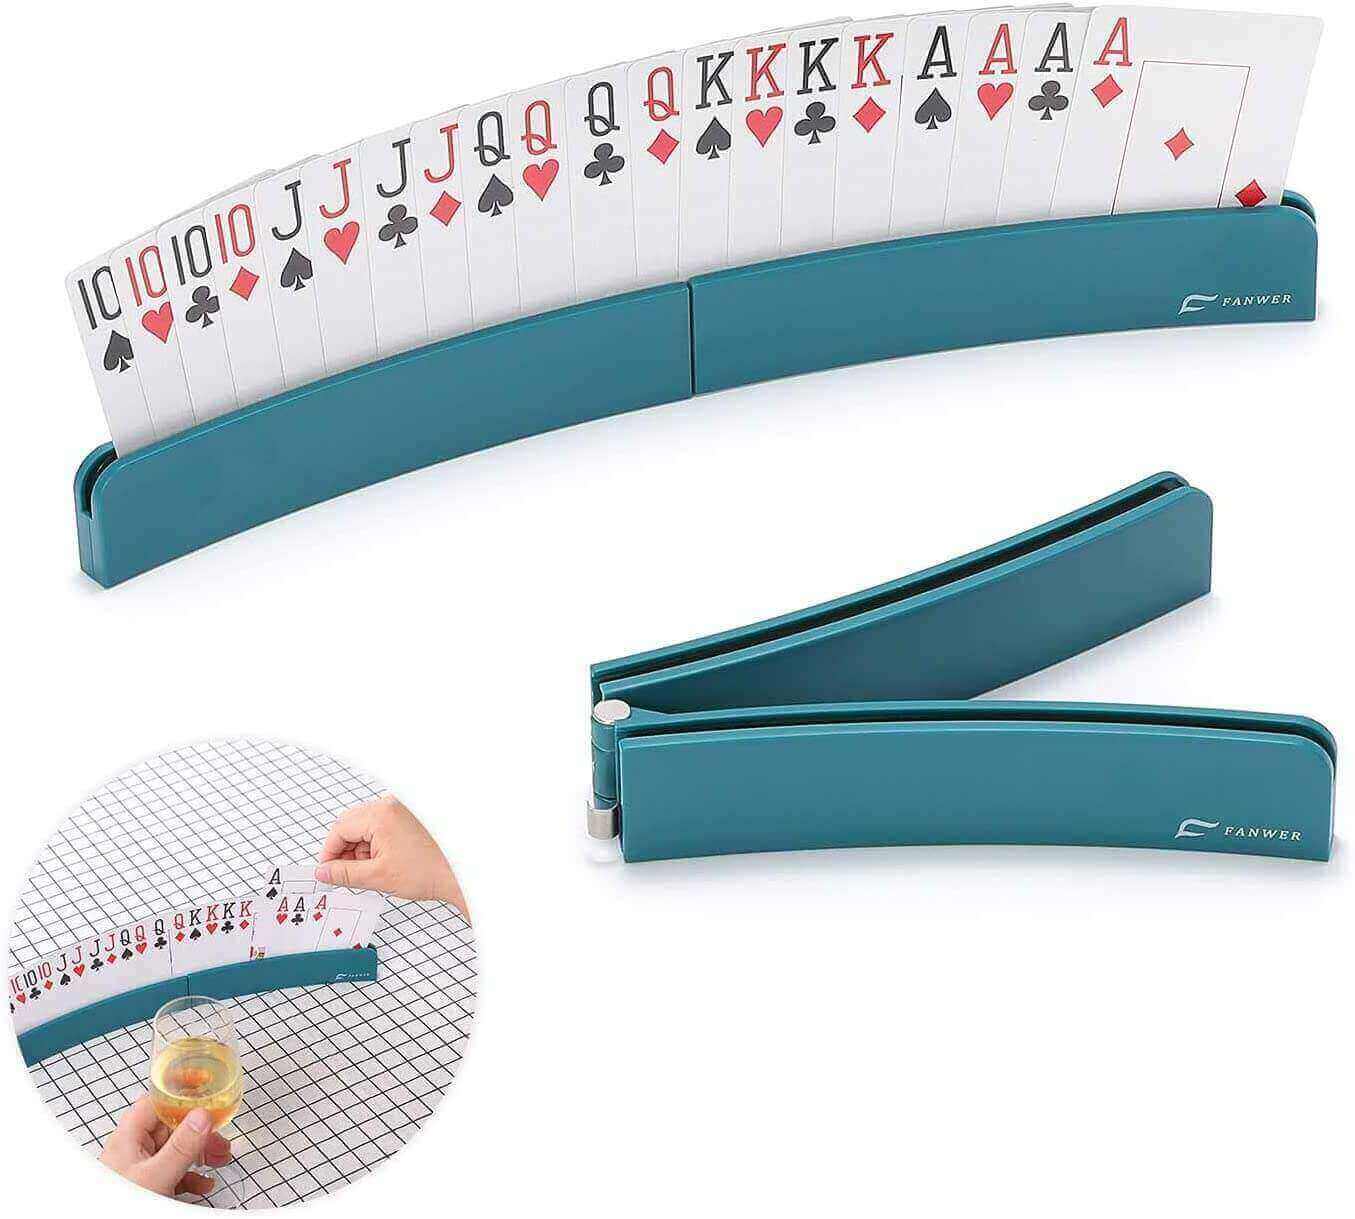 Fanwer poker card holder for playing cards, feature image